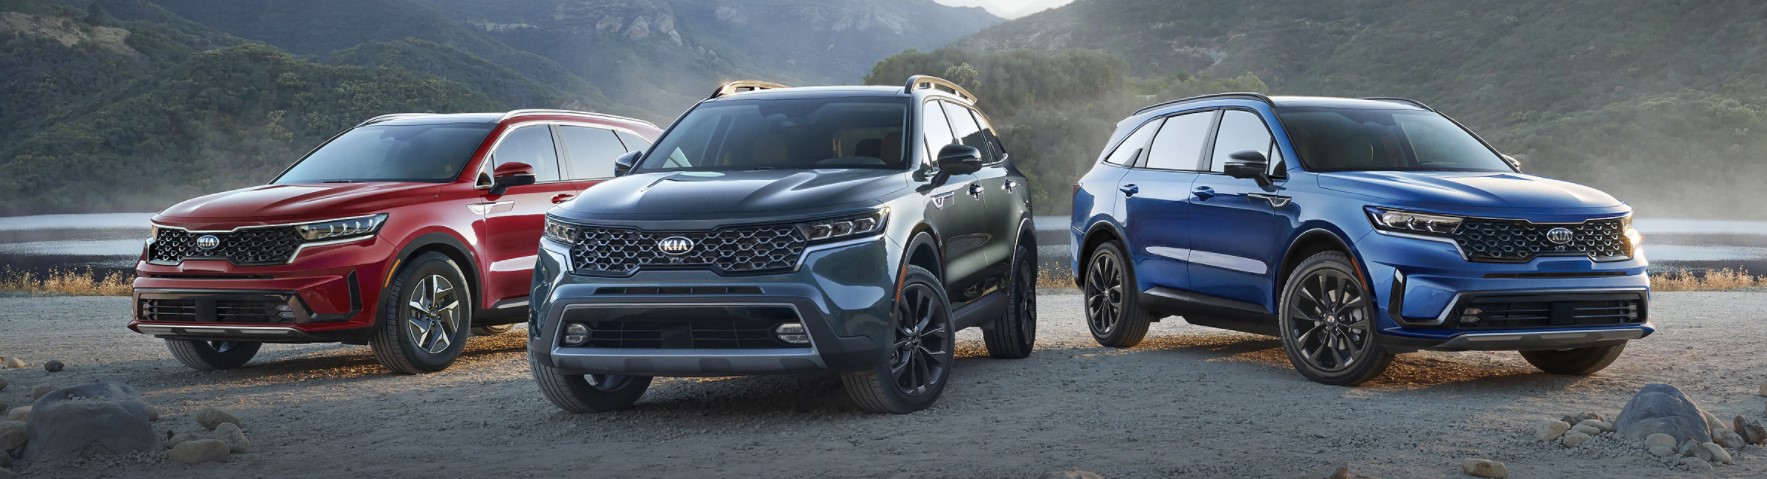 Collection of 2021 Kia Sorento SUVs in Different Colors against Mountainous Background